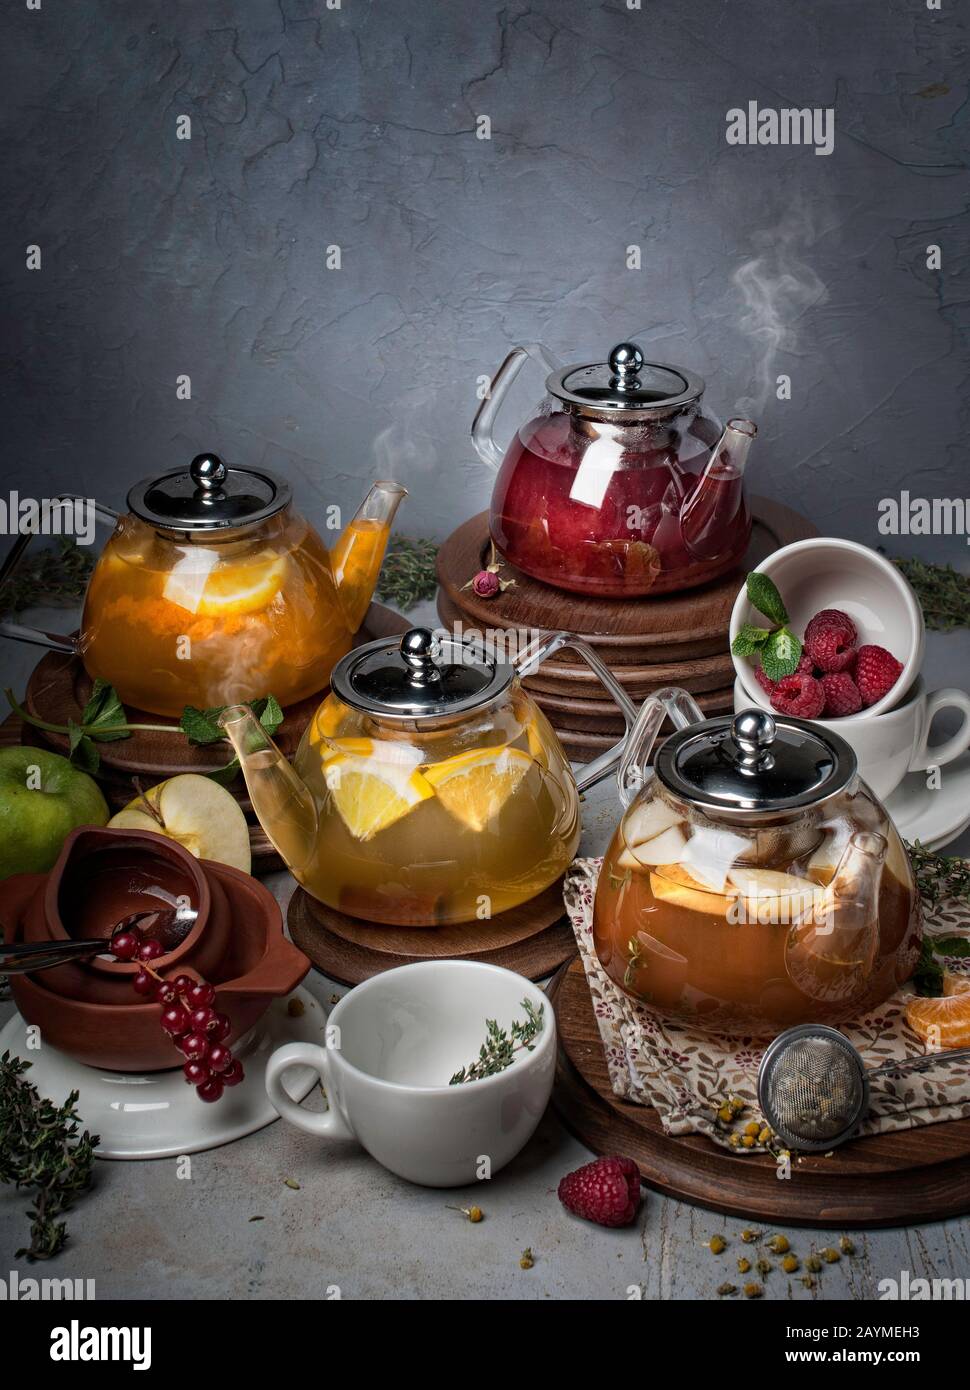 food photography of different kind of teapot and cup of tea with fruits and berries Stock Photo